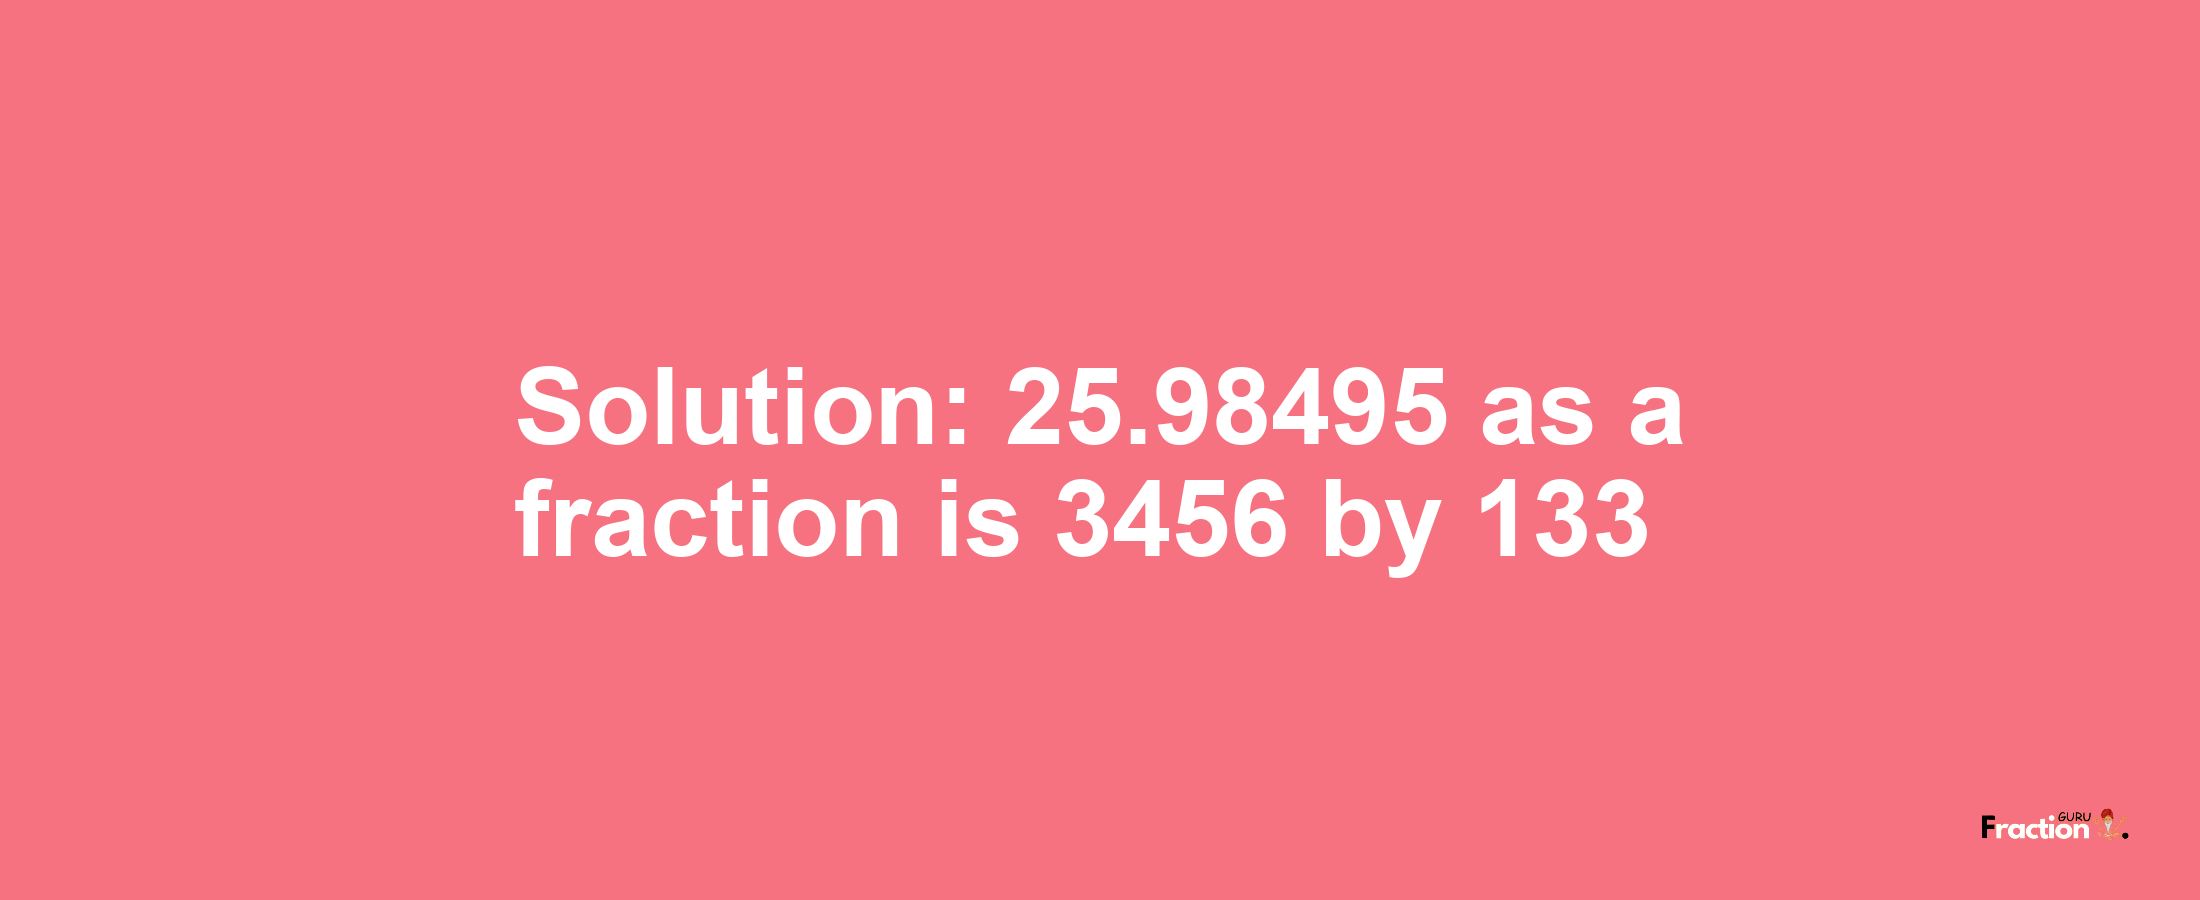 Solution:25.98495 as a fraction is 3456/133